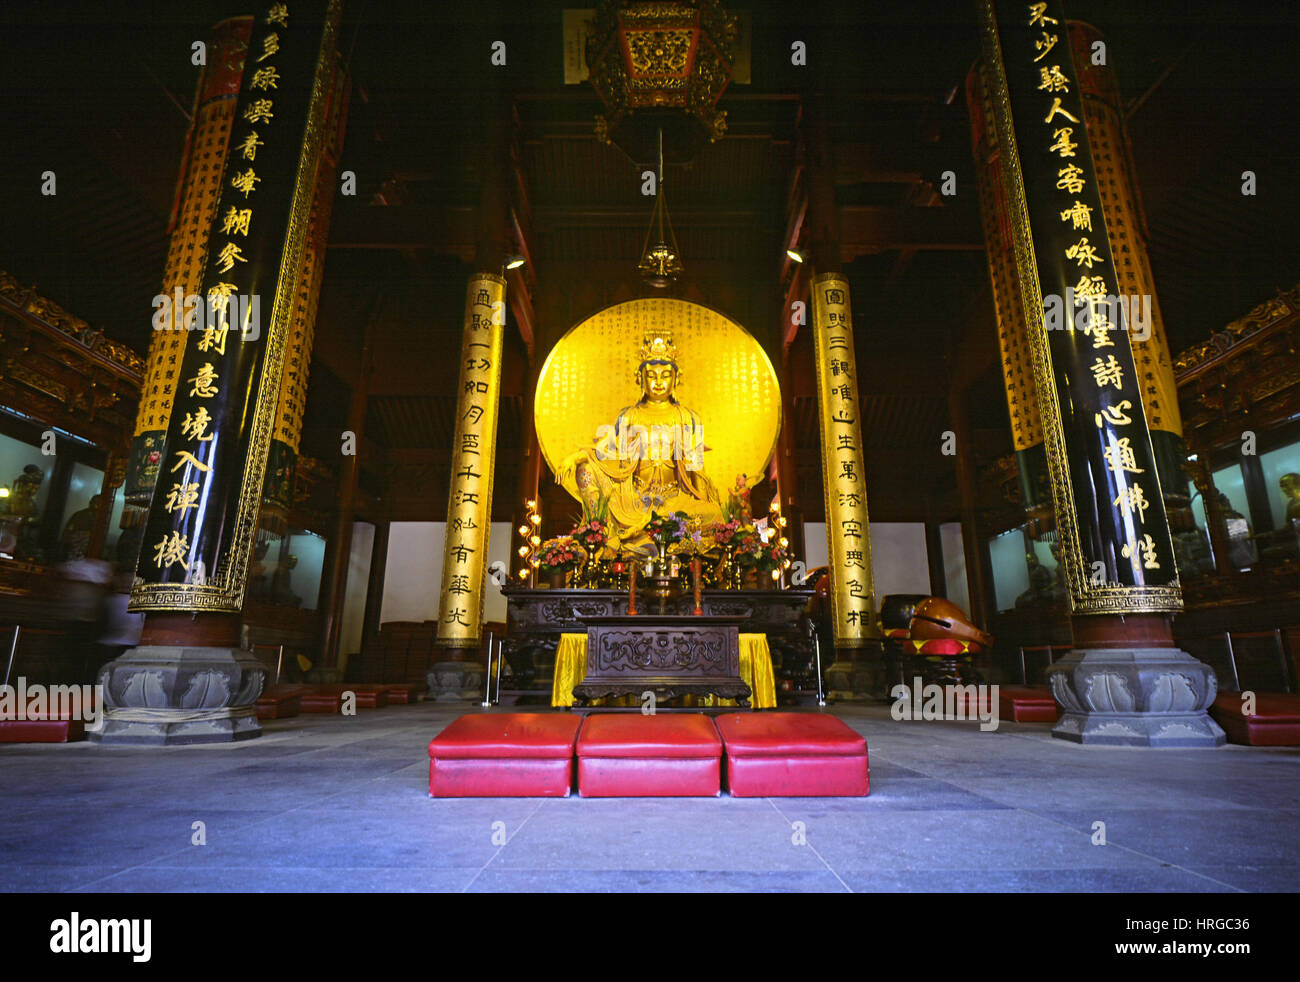 China. 1st Mar, 2017. The Mount Putuo.The four main sacred places of Buddhism in China are Mount Wutai in Shanxi, Mount Putuo in Zhejiang, Mount Emei in Sichuan and Mount Jiuhua in Anhui. Credit: SIPA Asia/ZUMA Wire/Alamy Live News Stock Photo